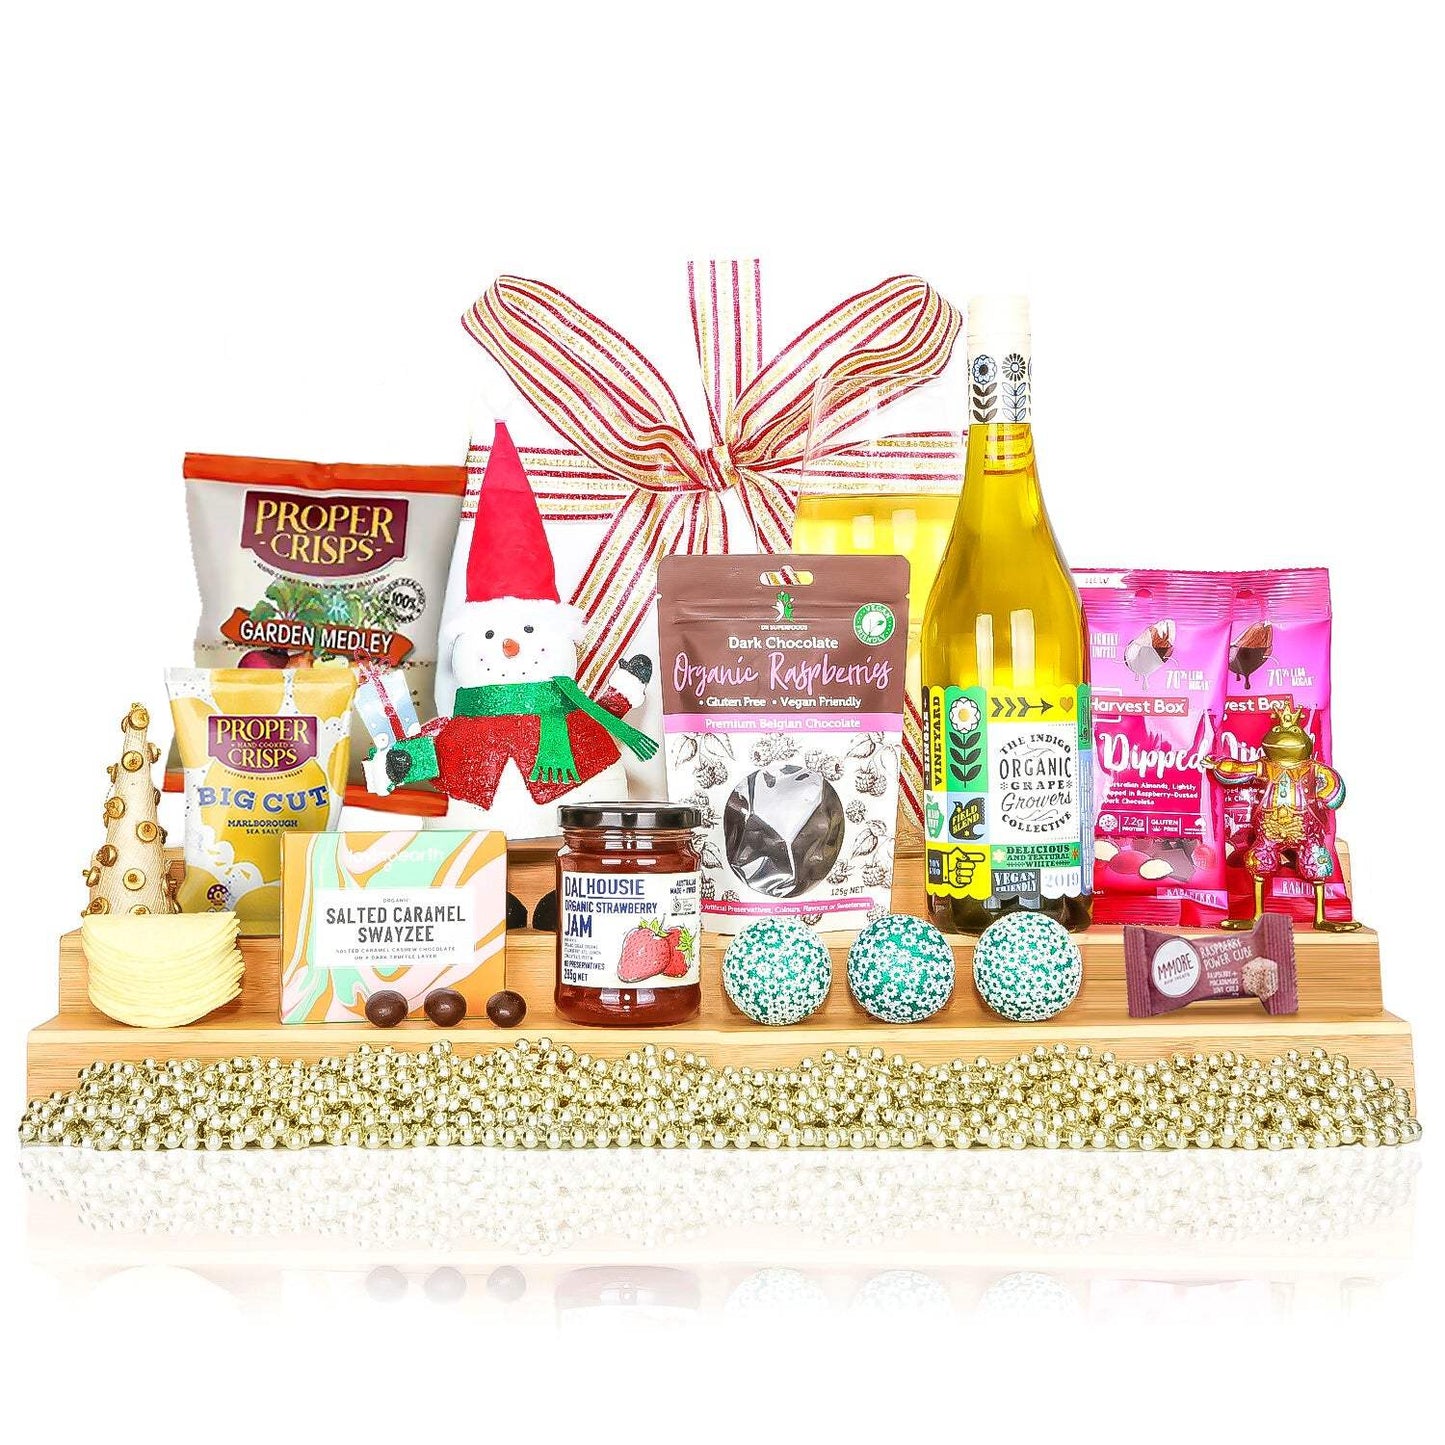 Christmas Treats - Healthy Belly Hampers - pure indulgence - birthday hampers - gift hampers - gift hampers melbourne - gift hampers australia - organic hampers -vegan hampers - gluten free hampers - birthday hampers -anniversary hampers - wedding hampers - alcohol hampers